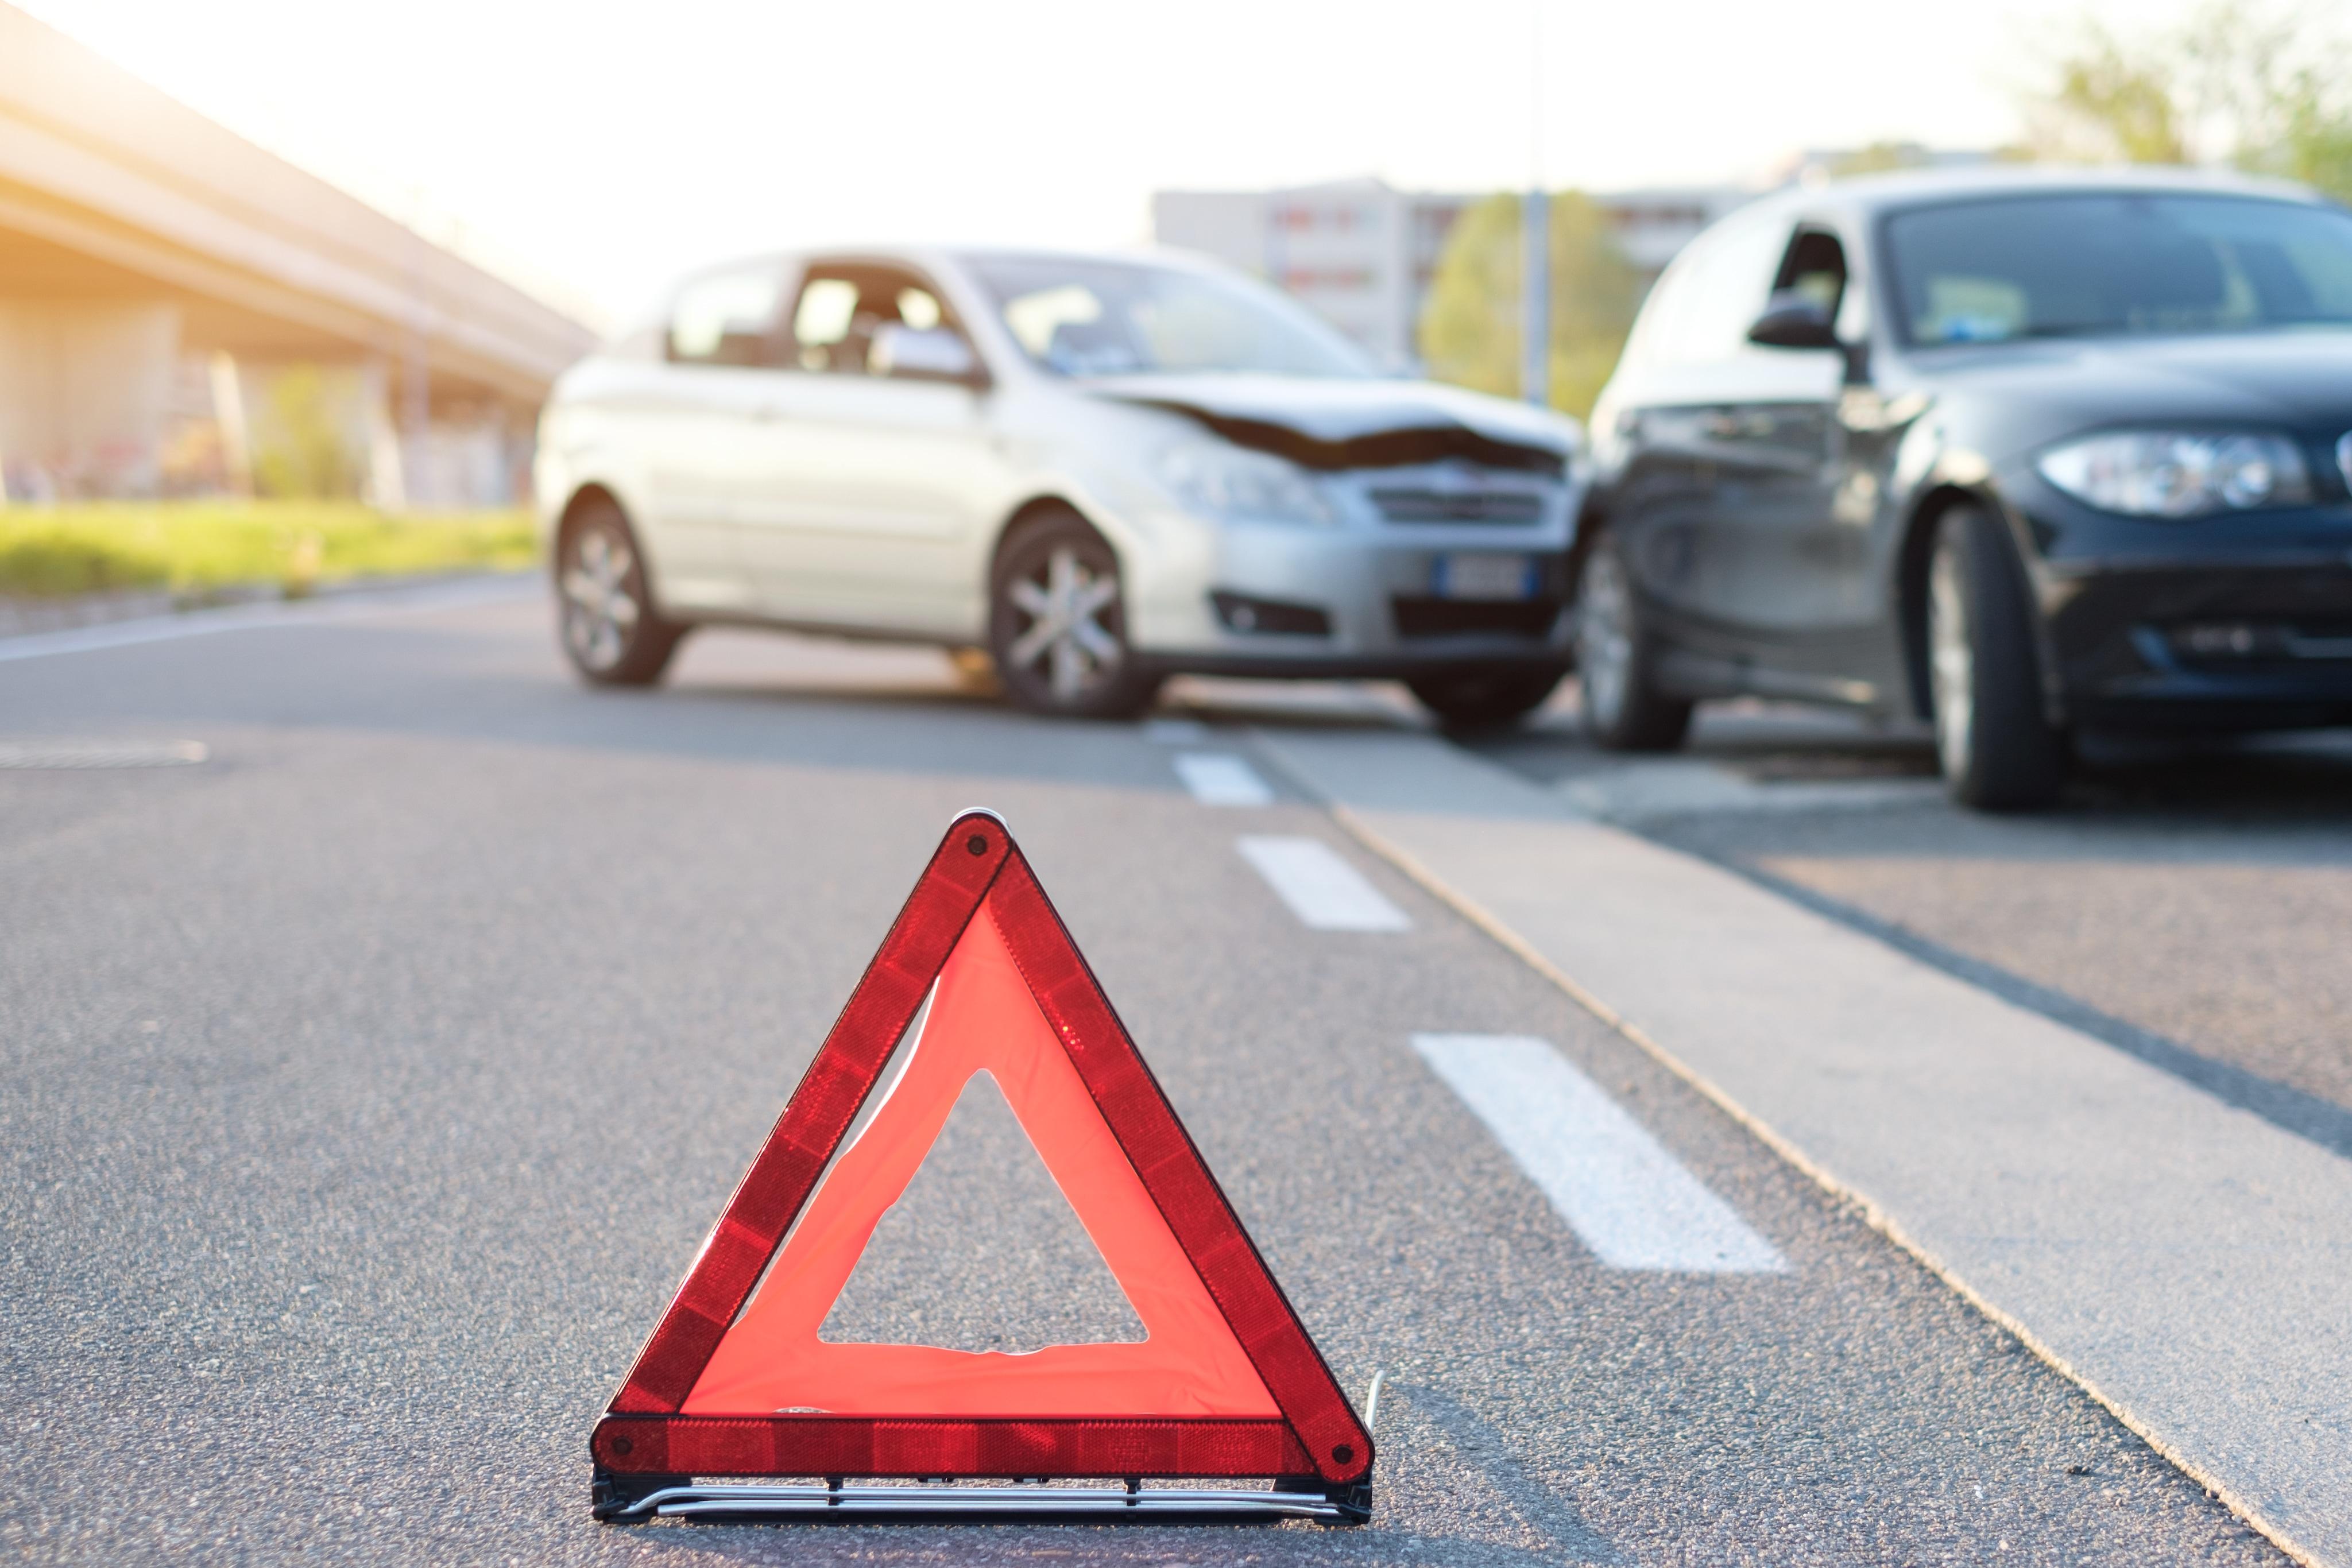 Caution triangle on road blocking vehicle accident